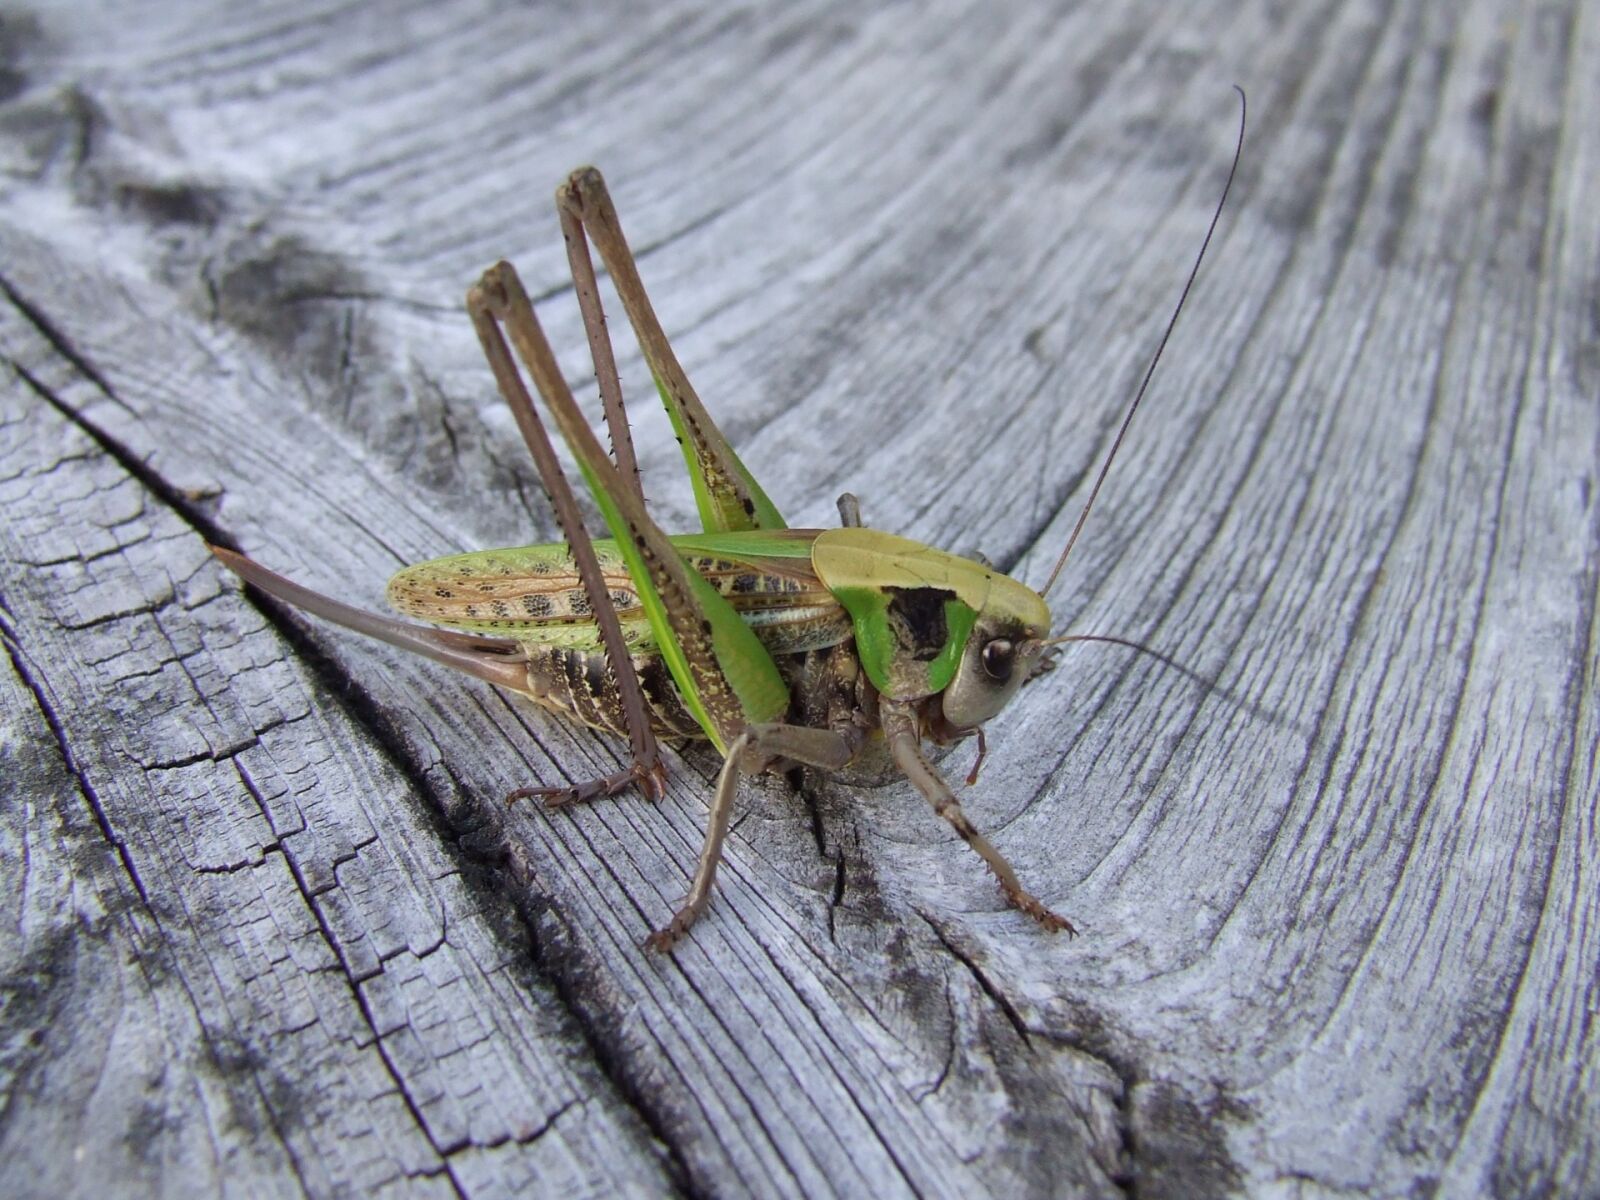 Fujifilm FinePix S5600 sample photo. Grasshopper, wood, insect photography